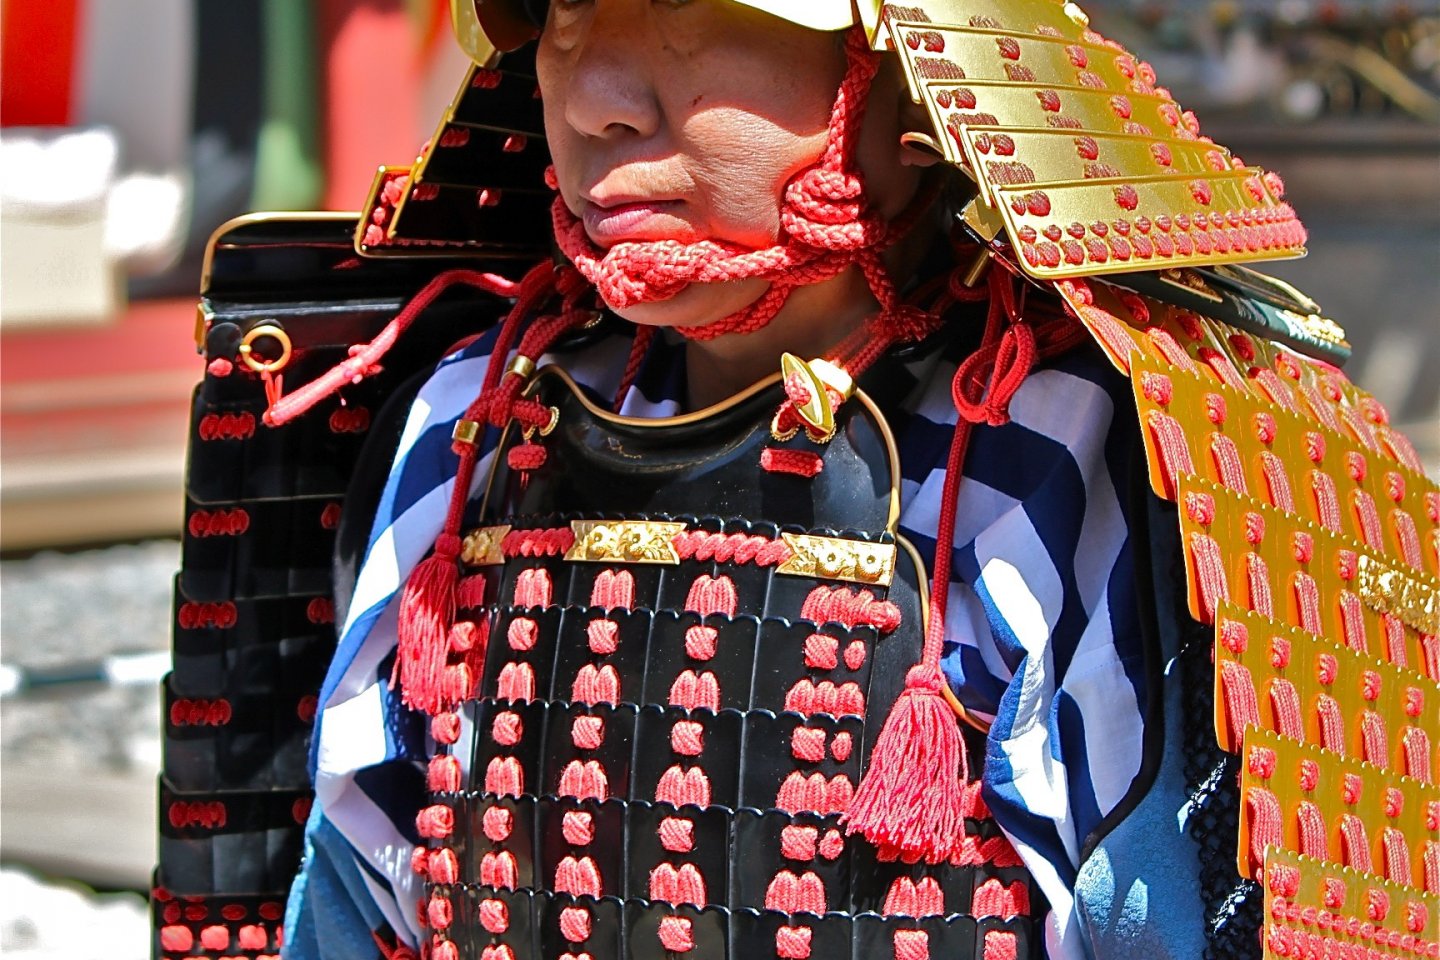 One of the thousands of the locals dressed in traditional warrior attire for the 1,000-person Samurai Procession in Nikko